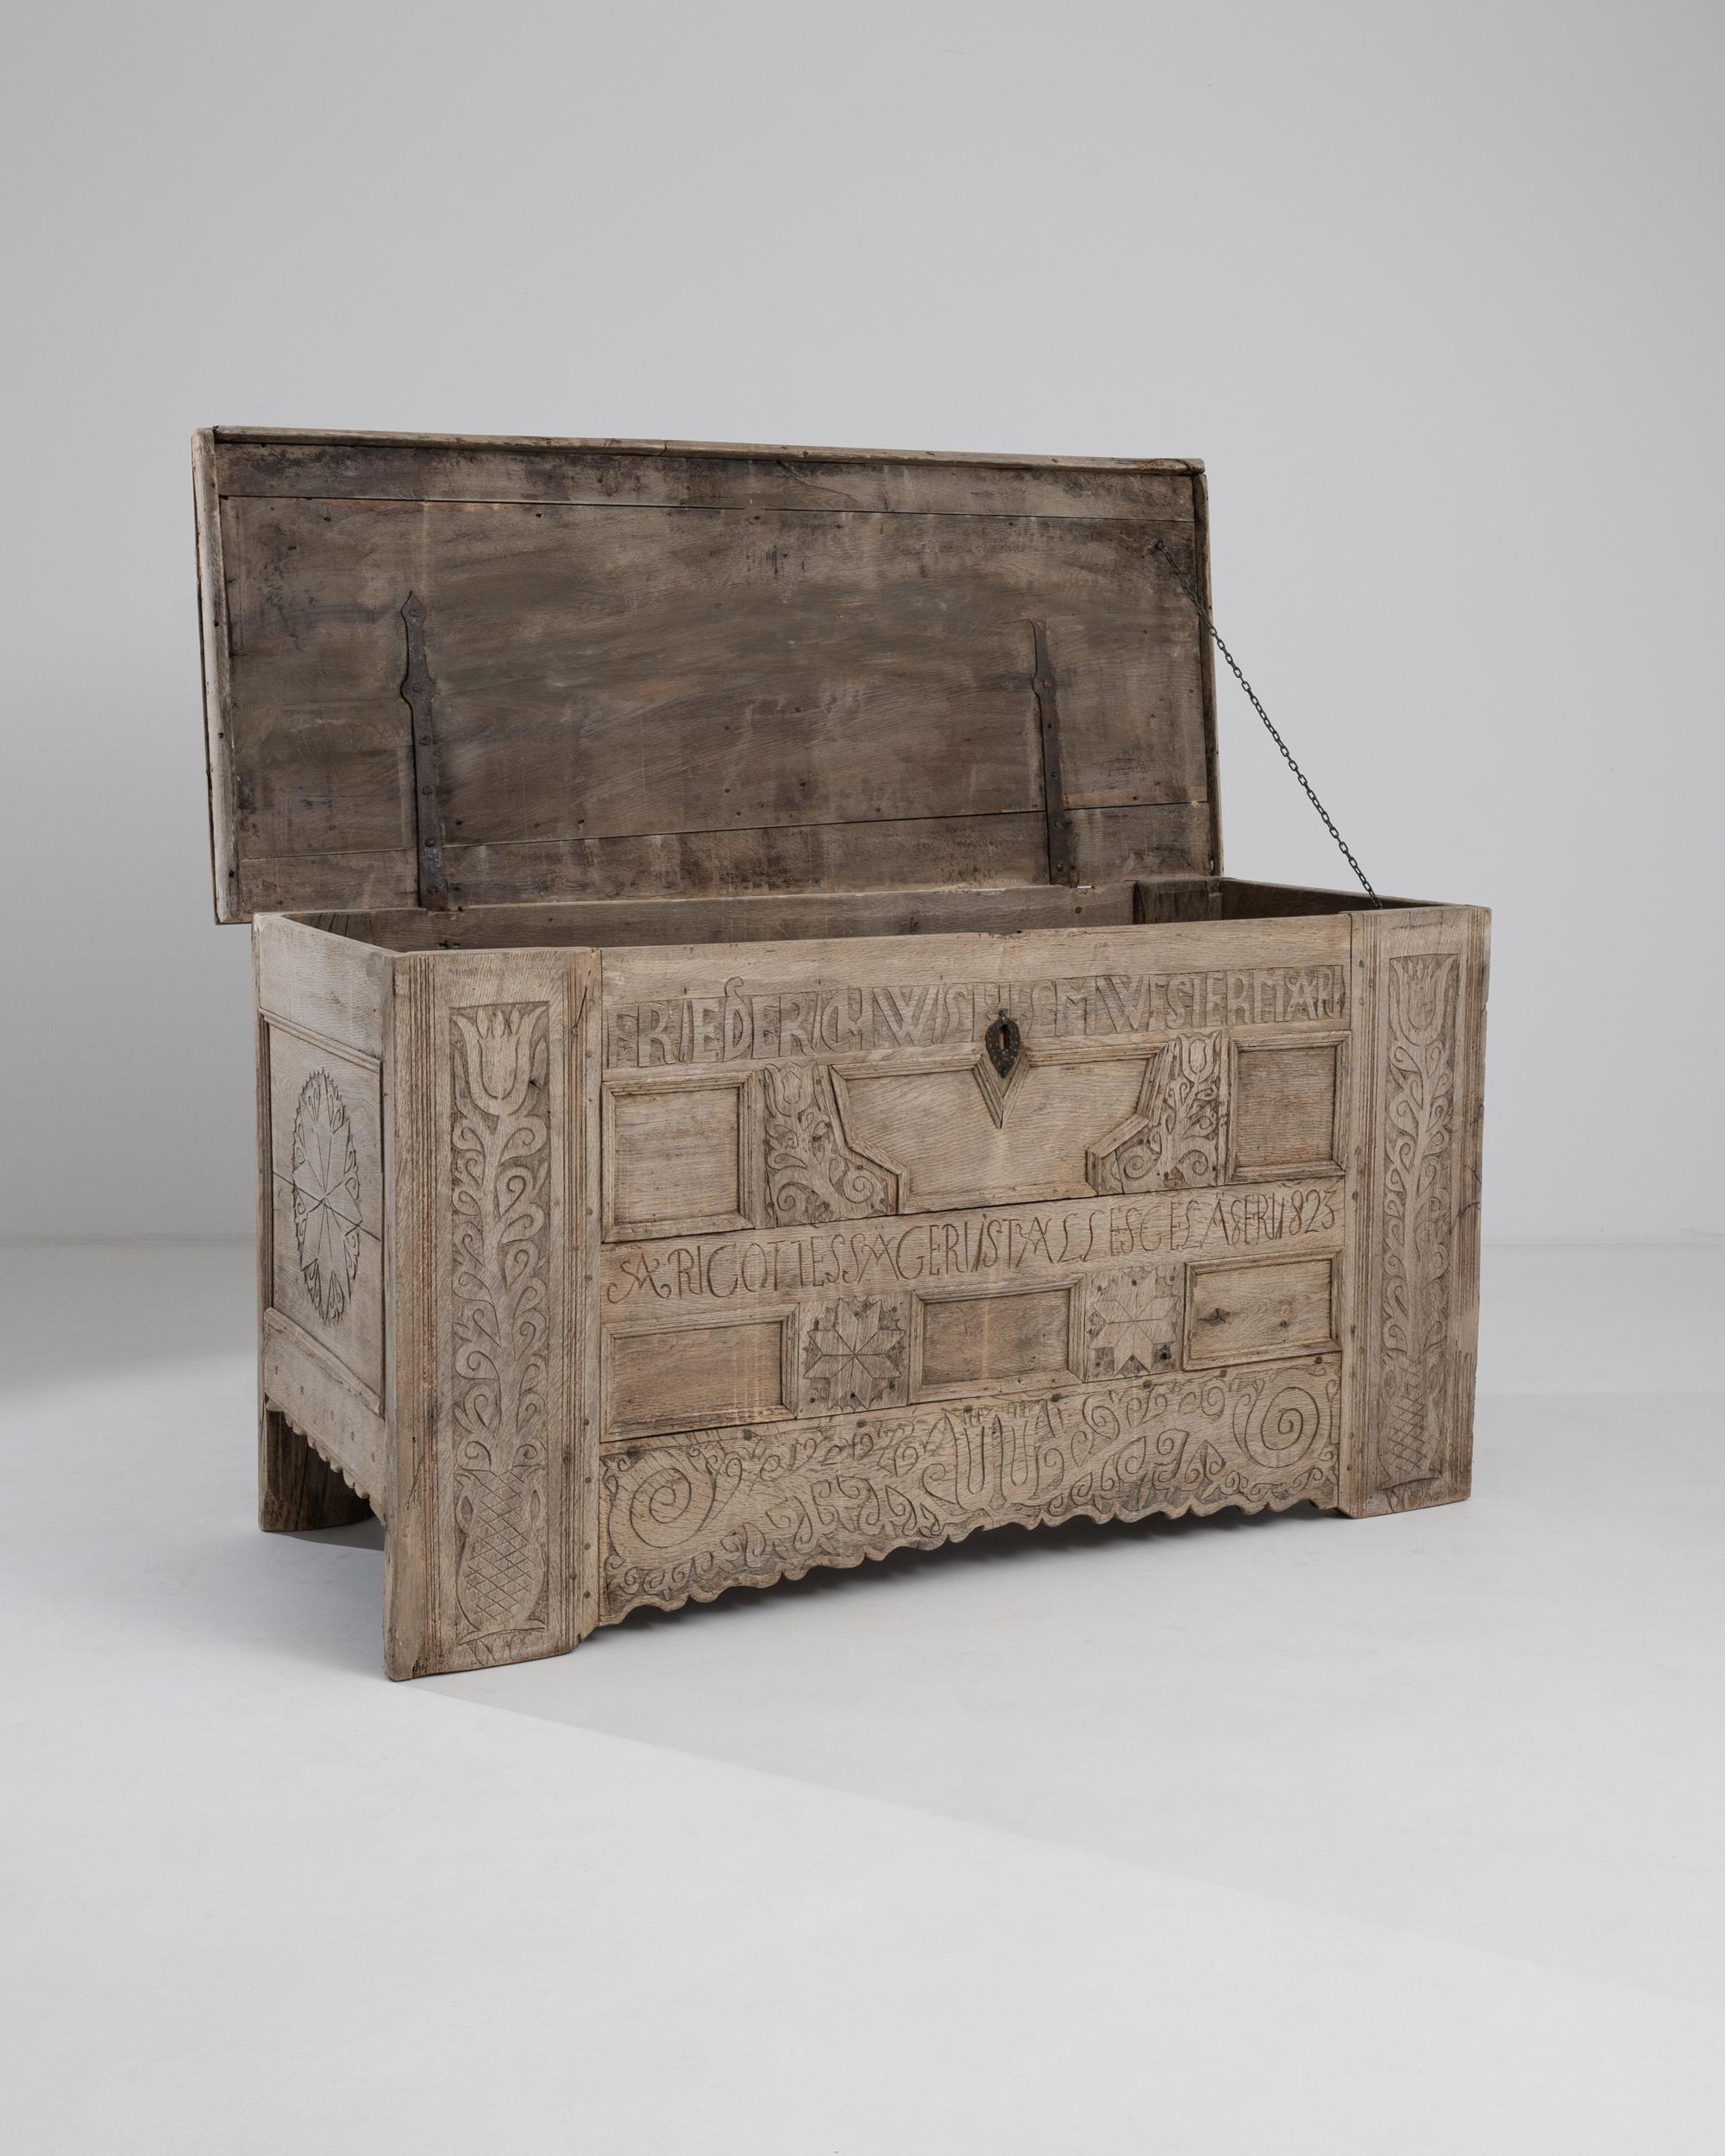 Bleached 19th Century German Wooden Trunk